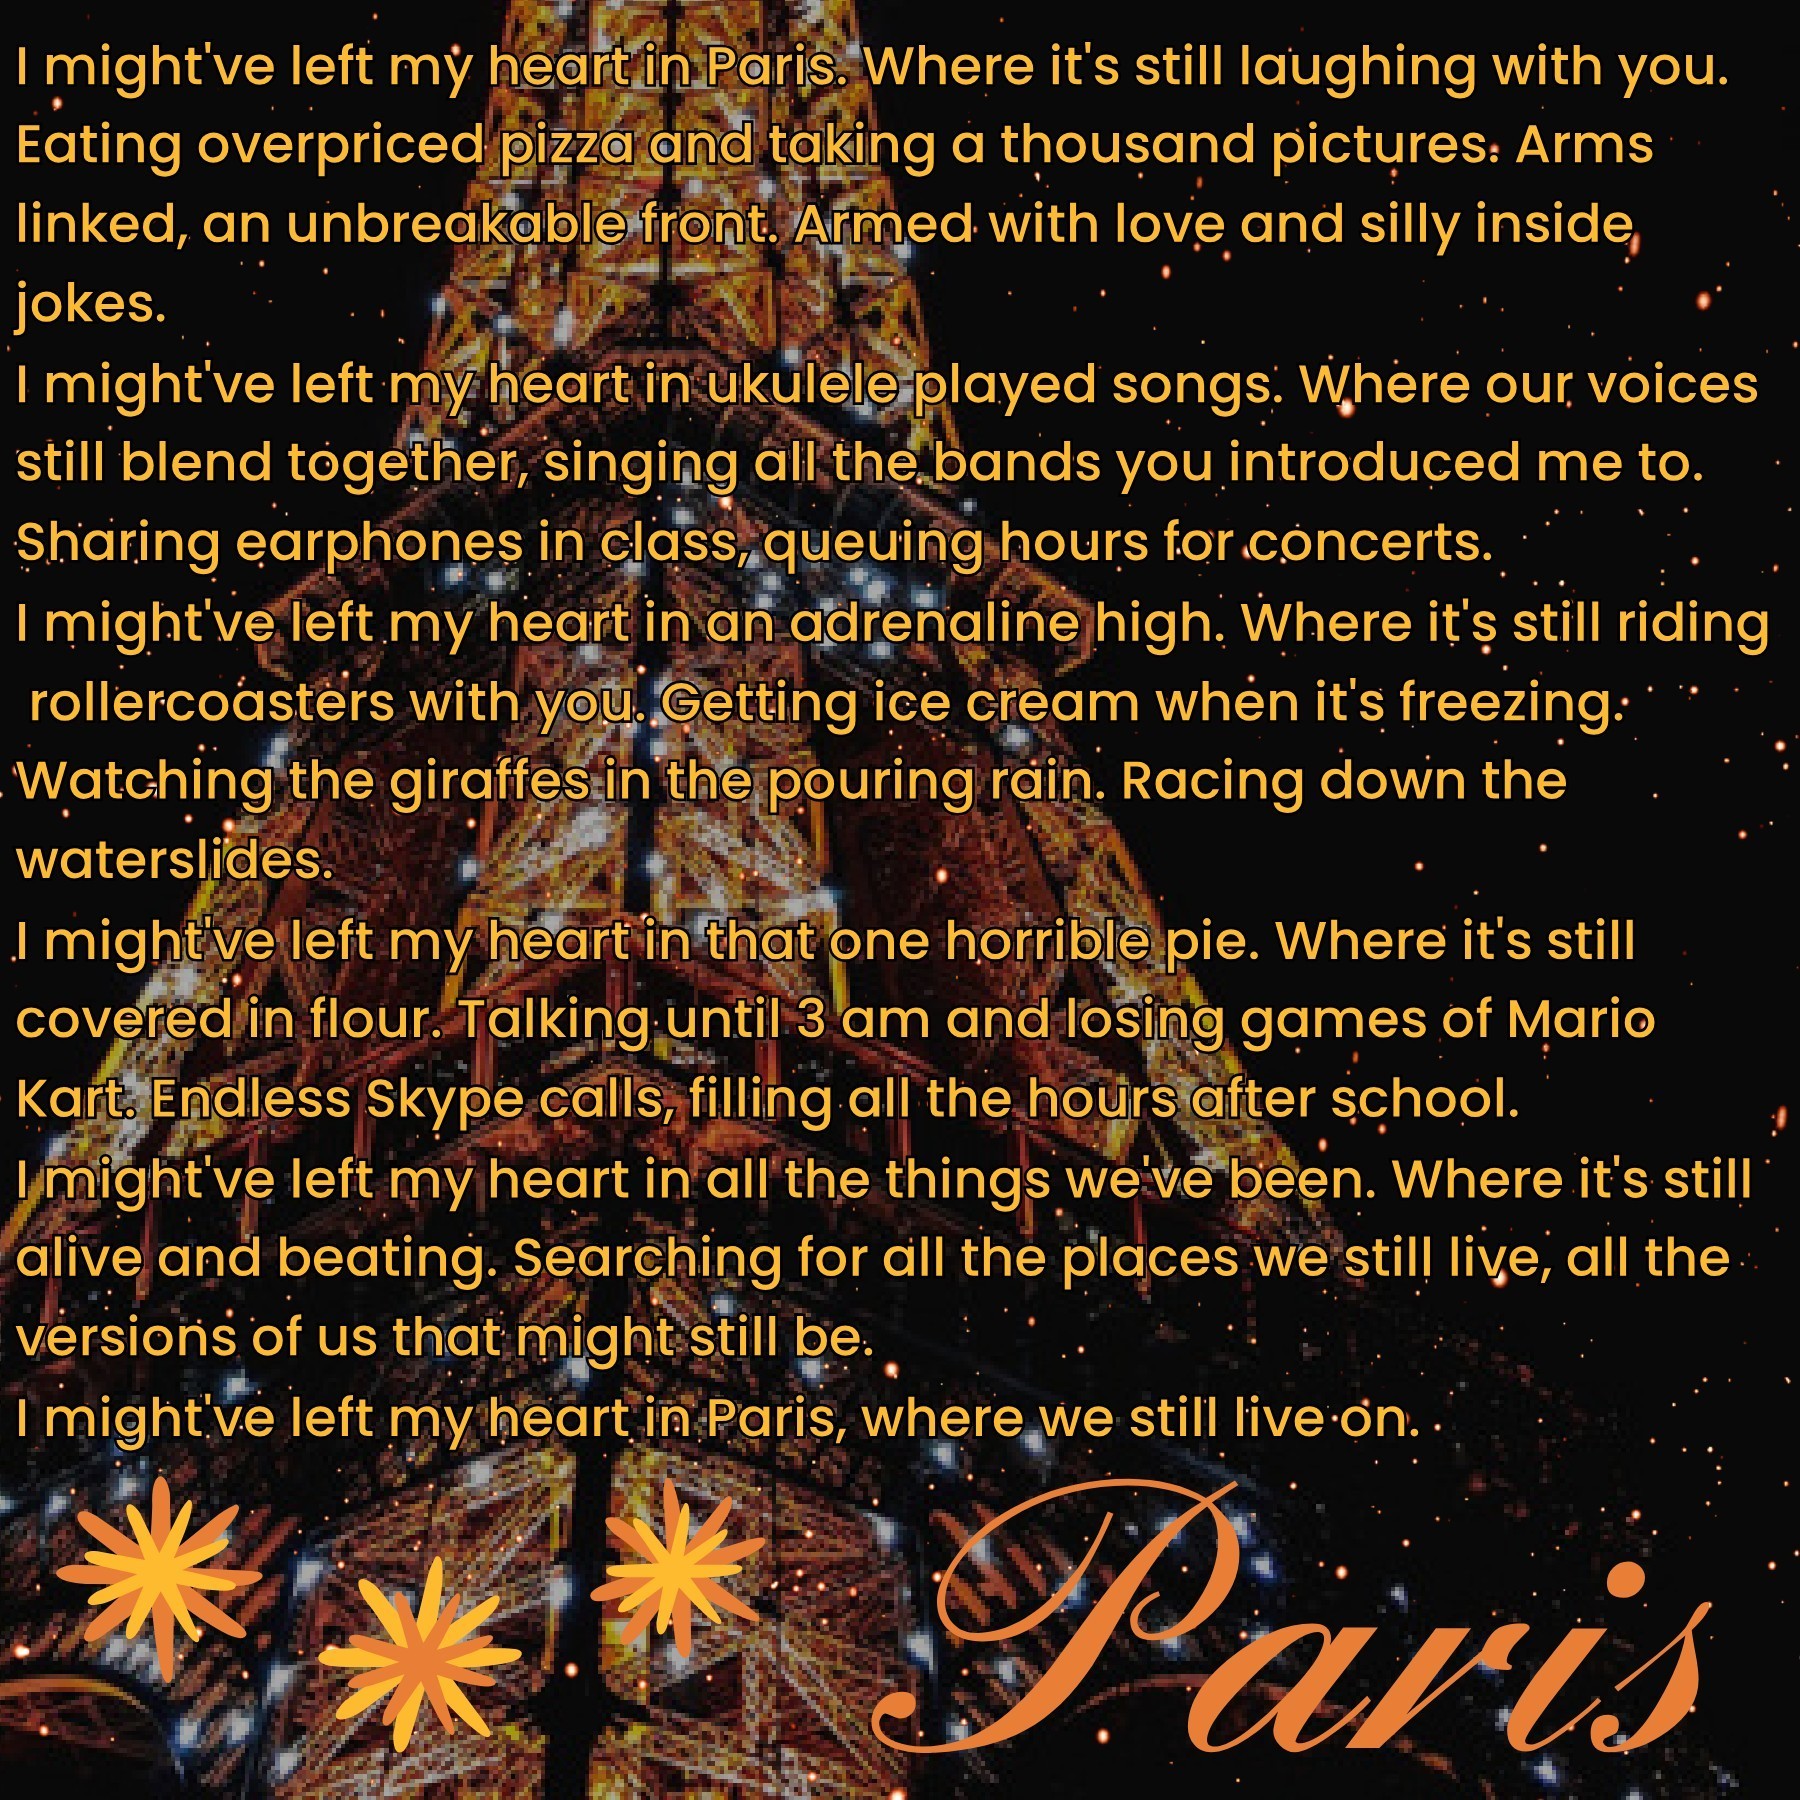 Paris part I. I could write a million poems about Paris and yet none of them would be about Paris, not really.